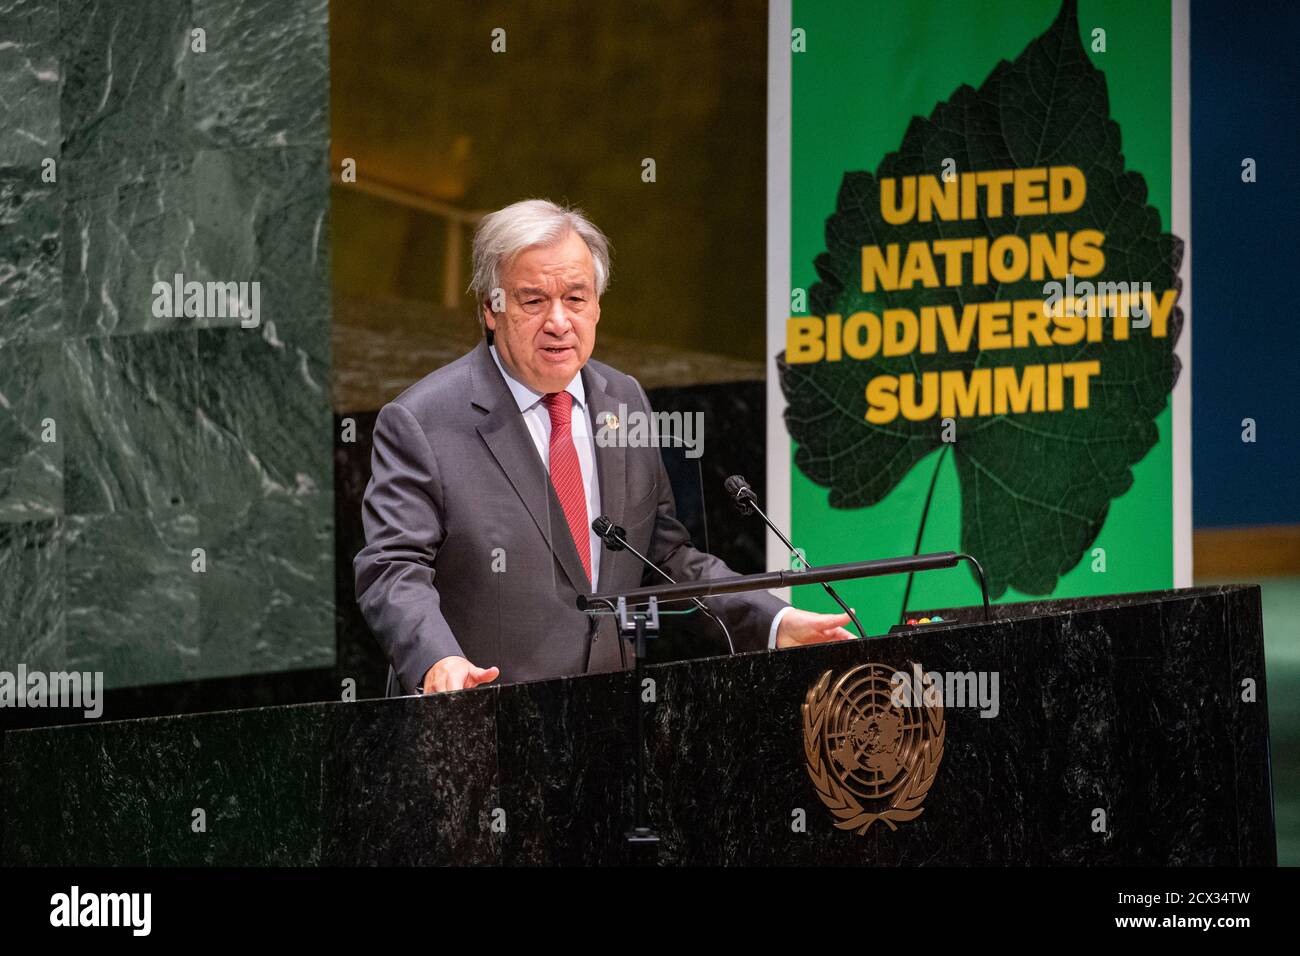 New York, USA. 30th Sep, 2020. United Nations Secretary-General Antonio Guterres addresses the UN Biodiversity Summit at the UN headquarters in New York, Sept. 30, 2020. Guterres on Wednesday called for greater ambition to reverse biodiversity loss. (Rick Bajornas/UN Photo/Handout via Xinhua) Credit: Xinhua/Alamy Live News Stock Photo